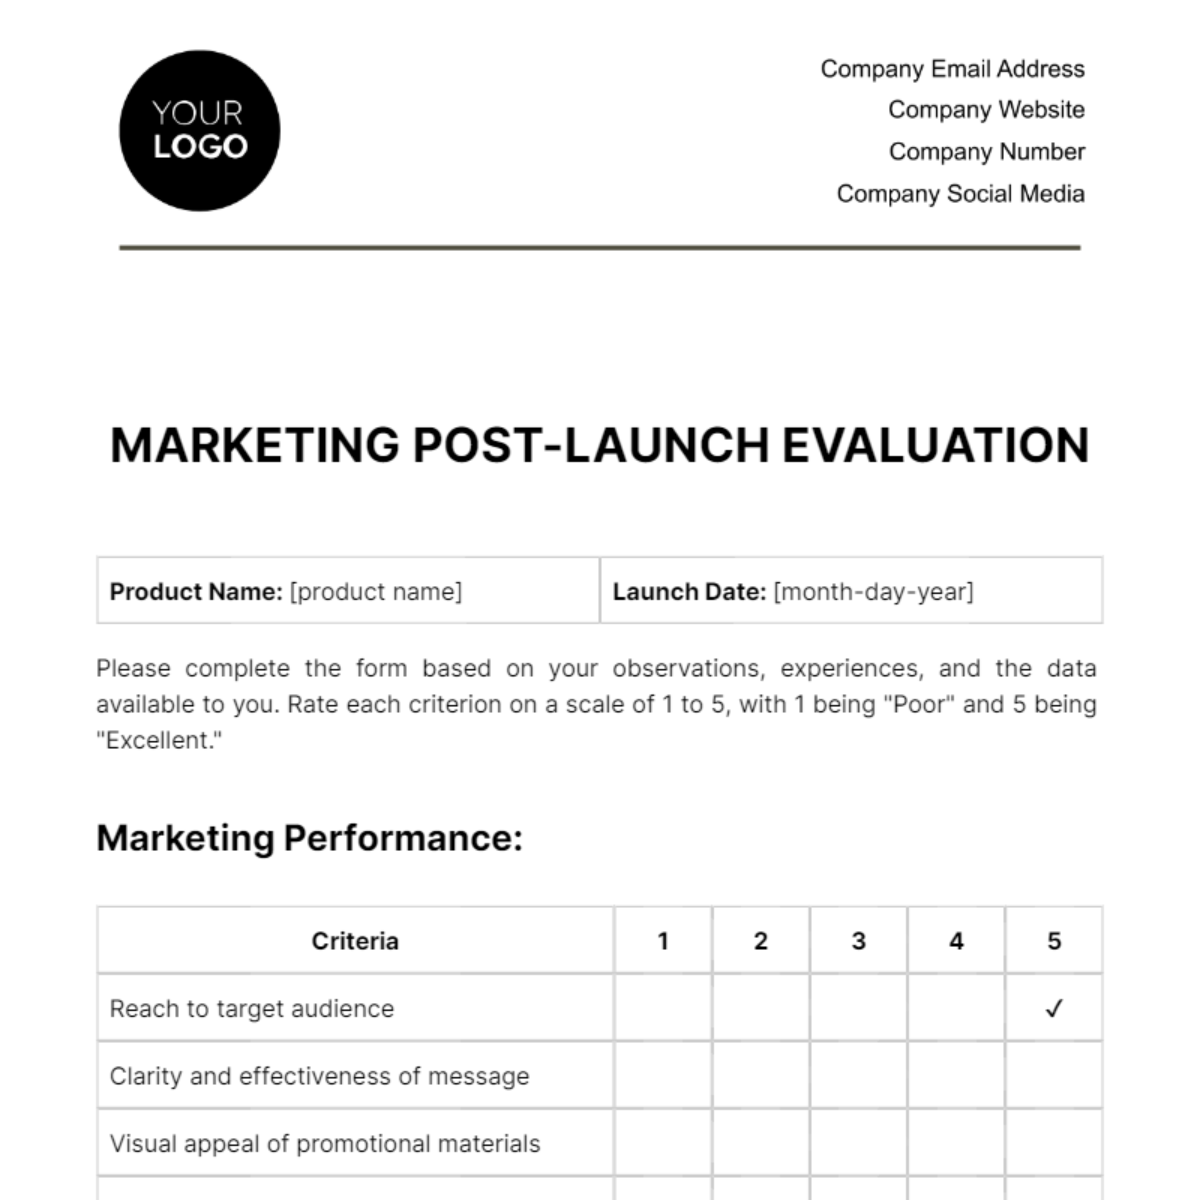 Marketing Post-Launch Evaluation Template